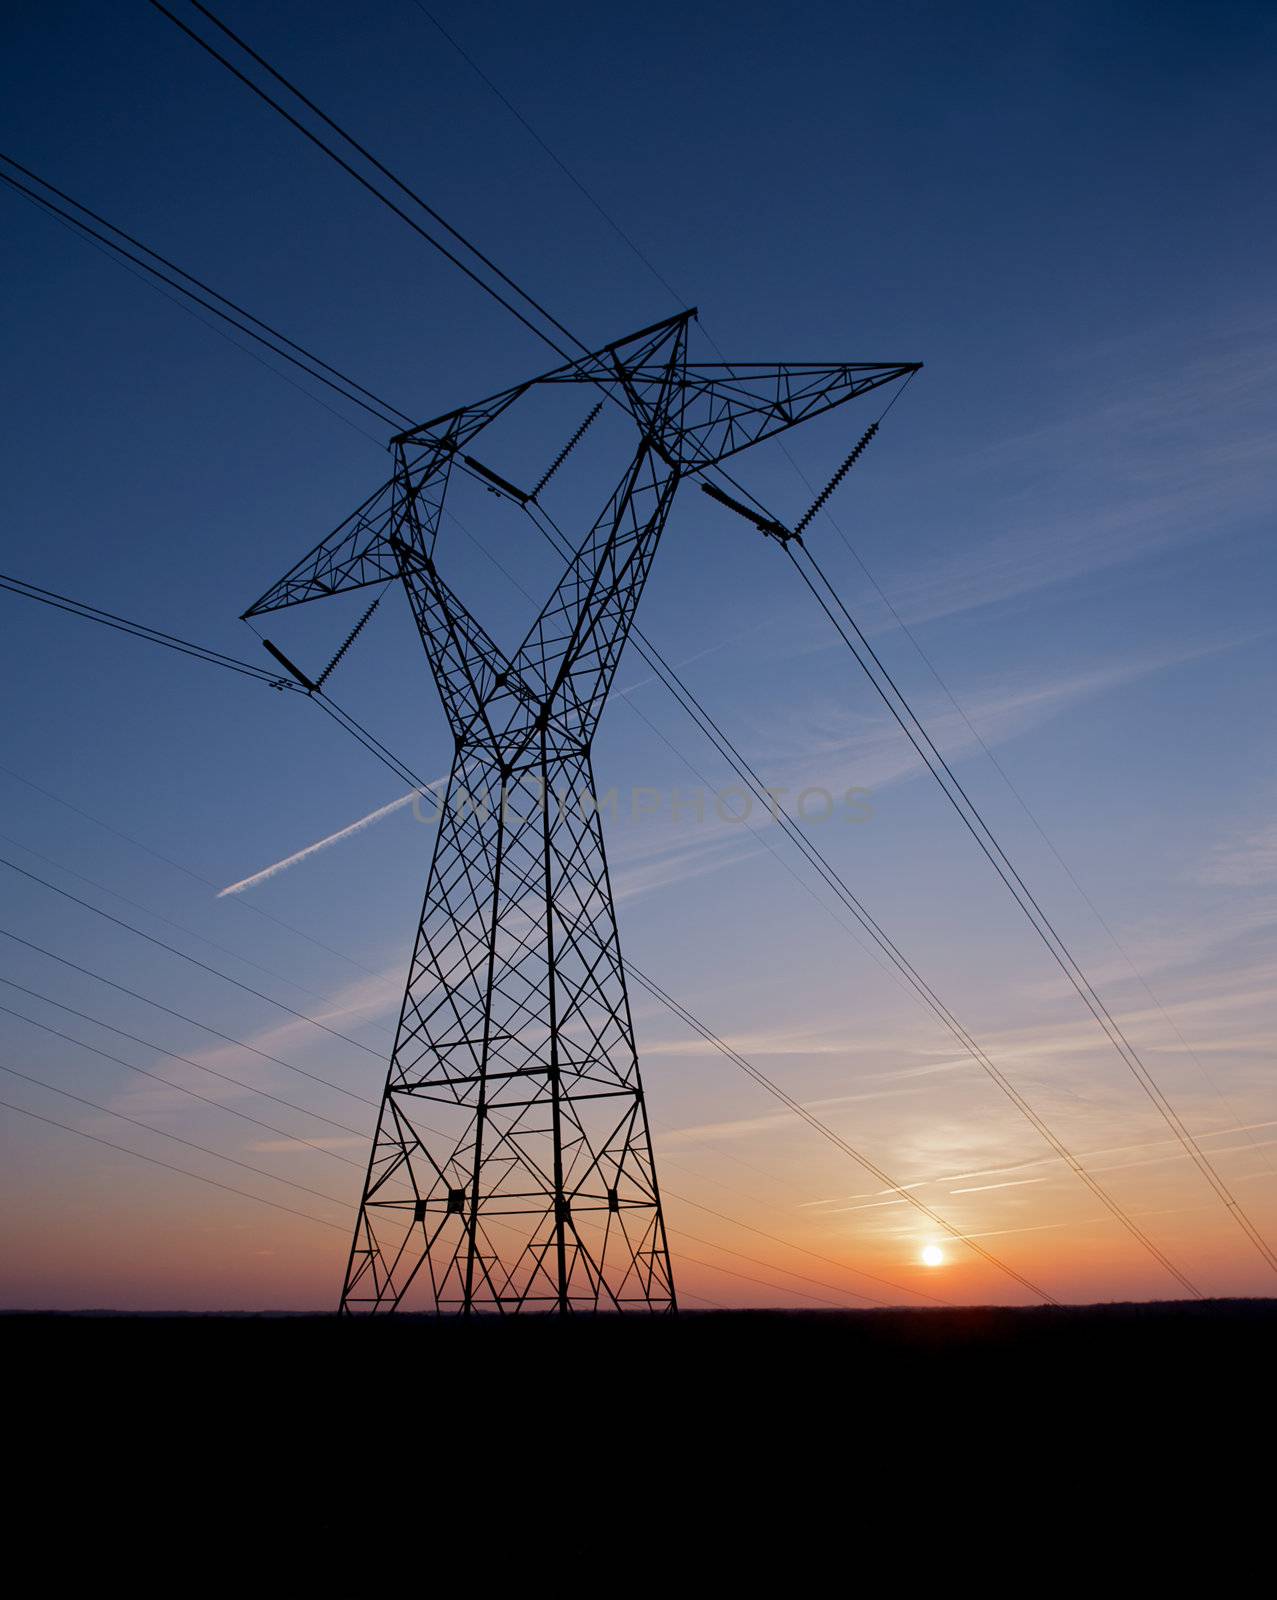 Electric power pylon and wires silhouetted by a colorful sunset. 
